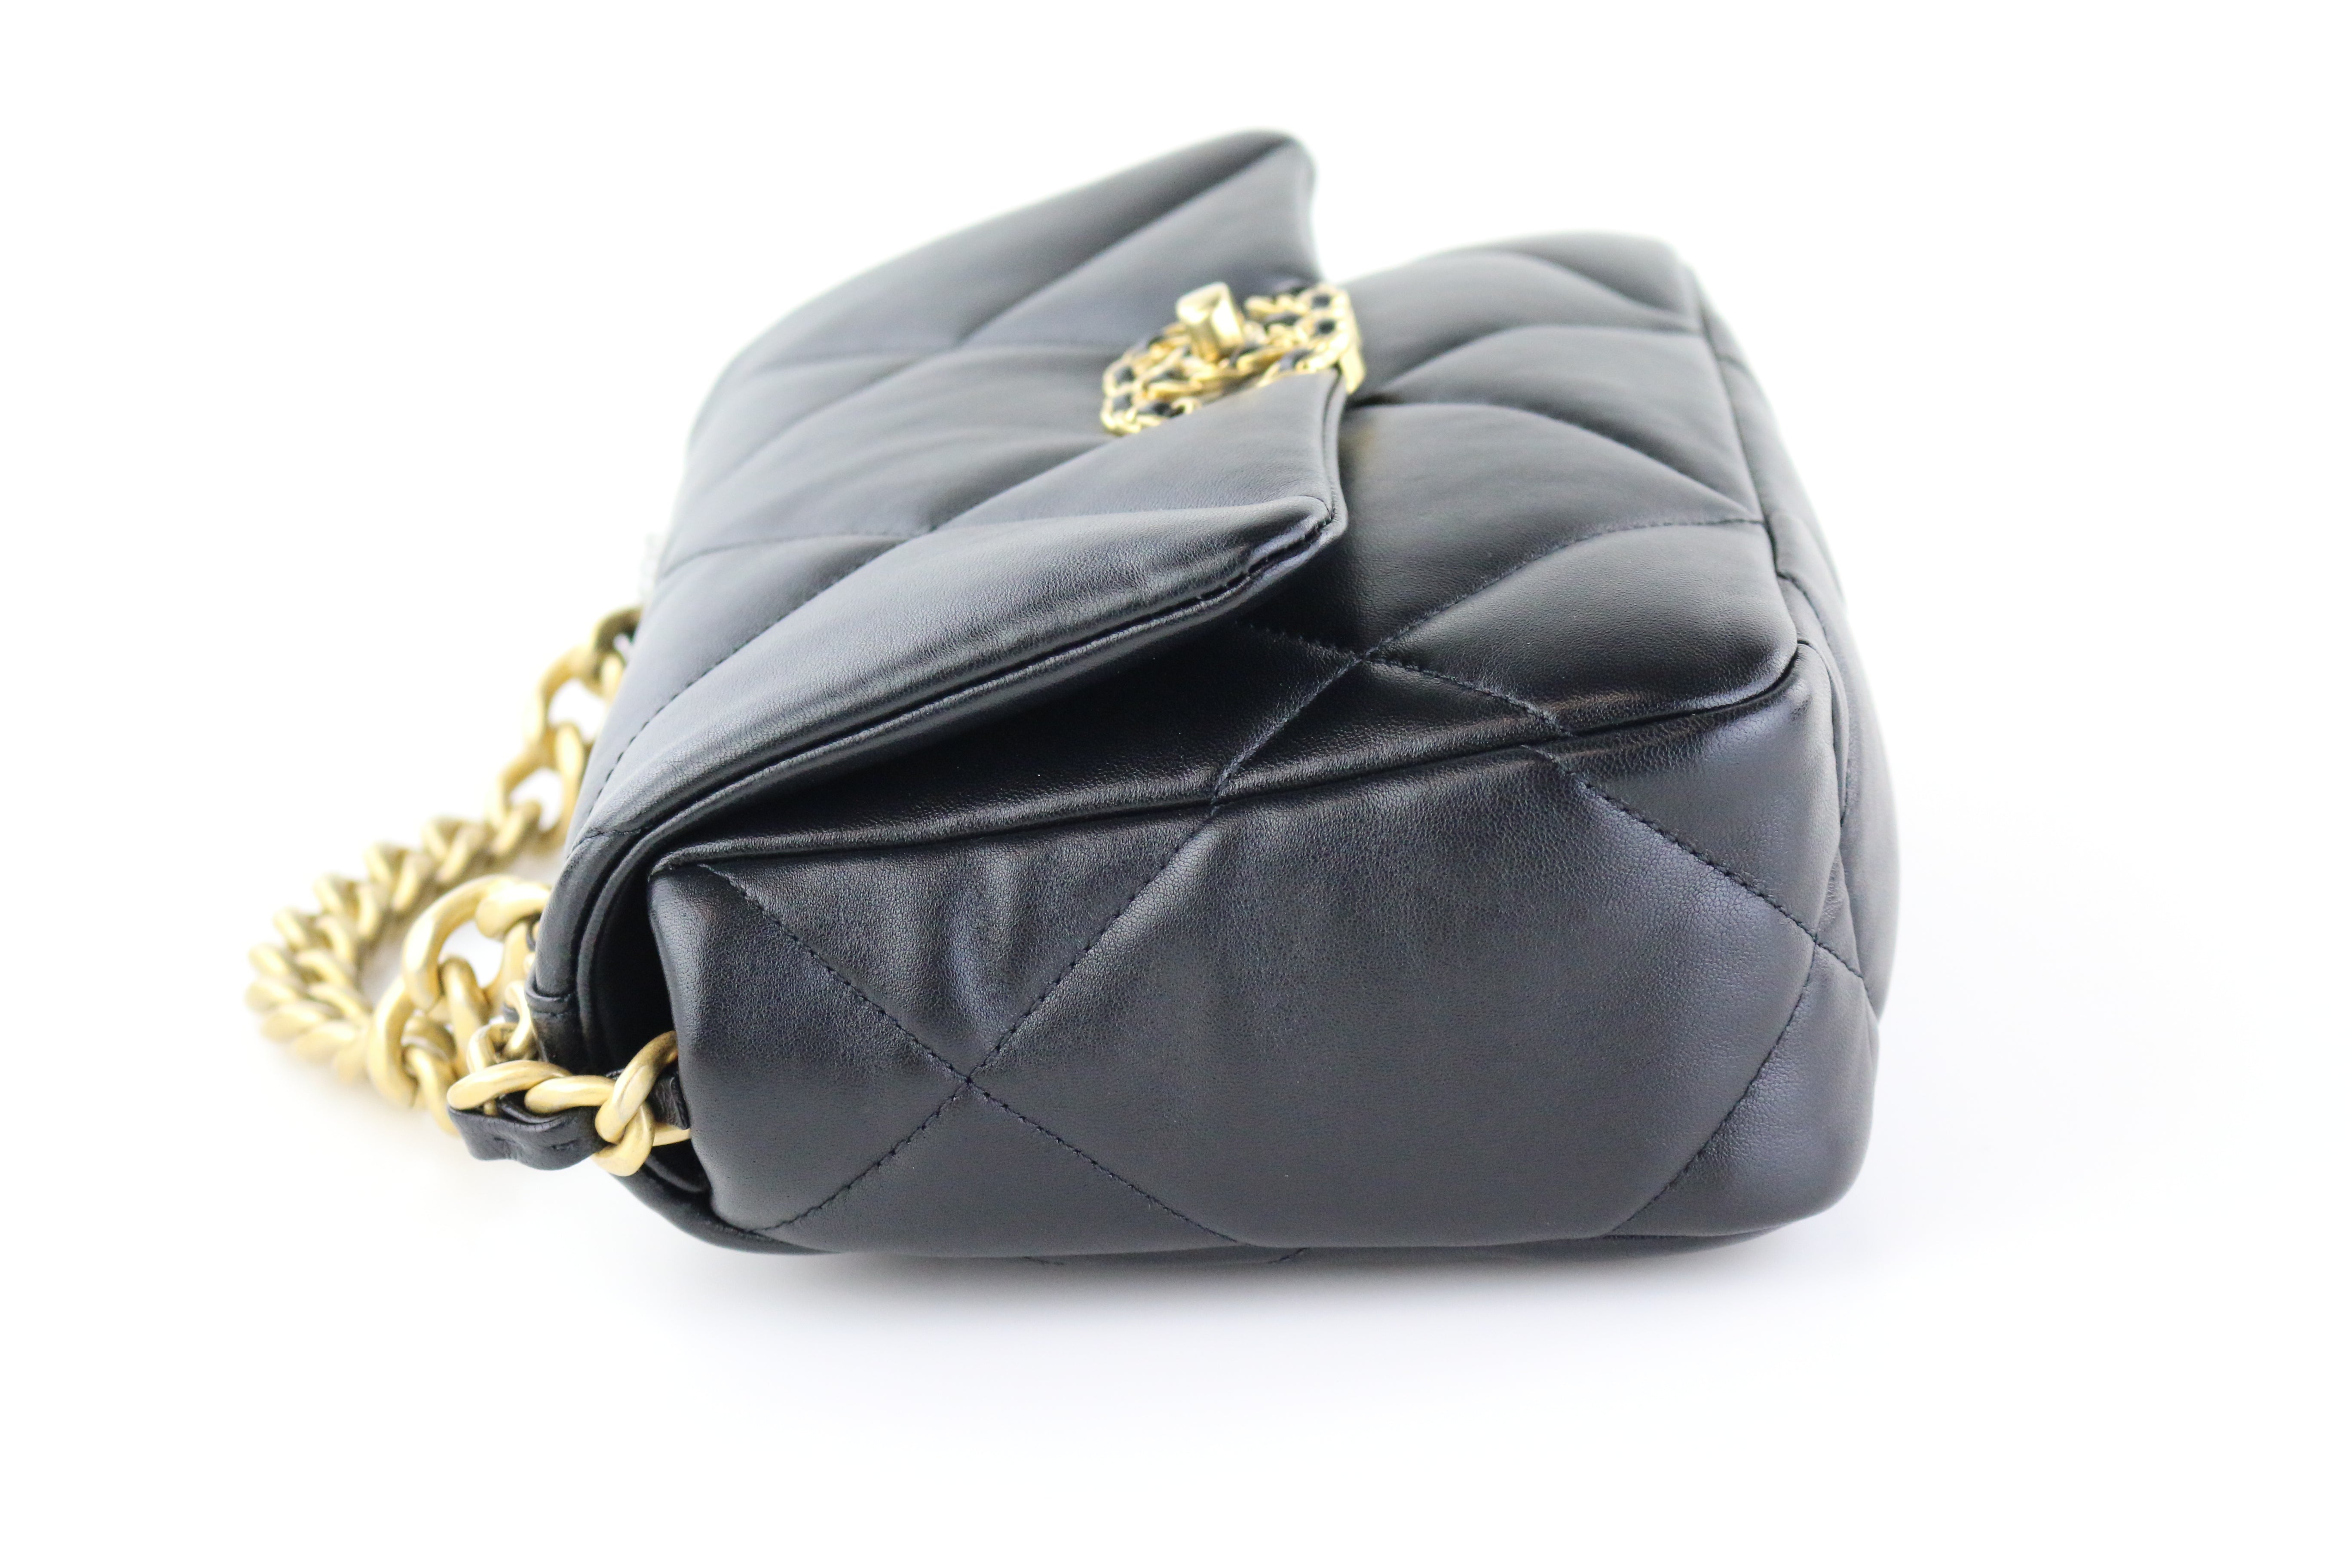 UNBOXING CHANEL 19 MINI POUCH - BLACK GOATSKIN AND GOLD HARDWARE 